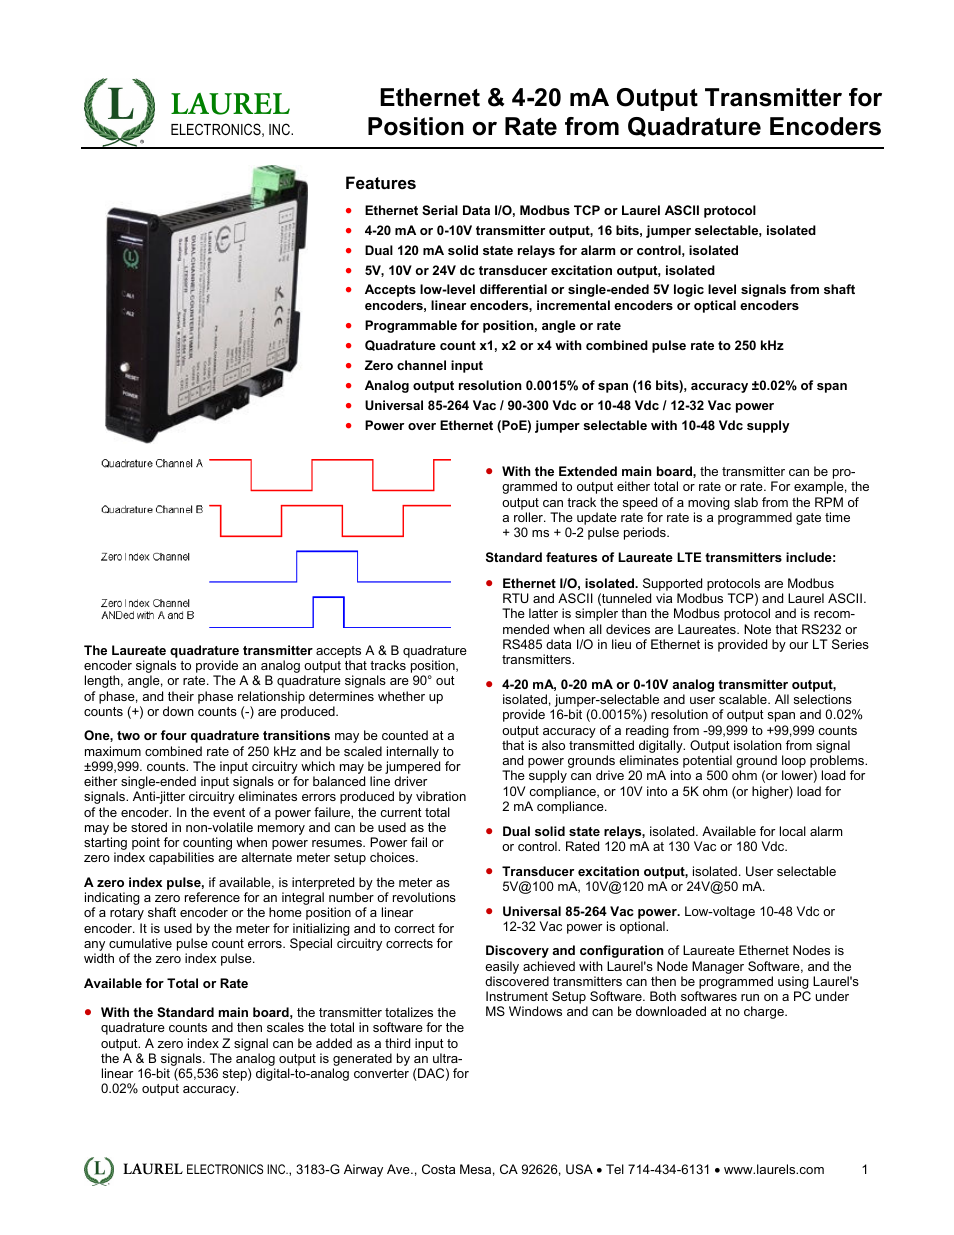 LTE: Ethernet & 4-20 mA Output Transmitter for Position or Rate from Quadrature Encoders